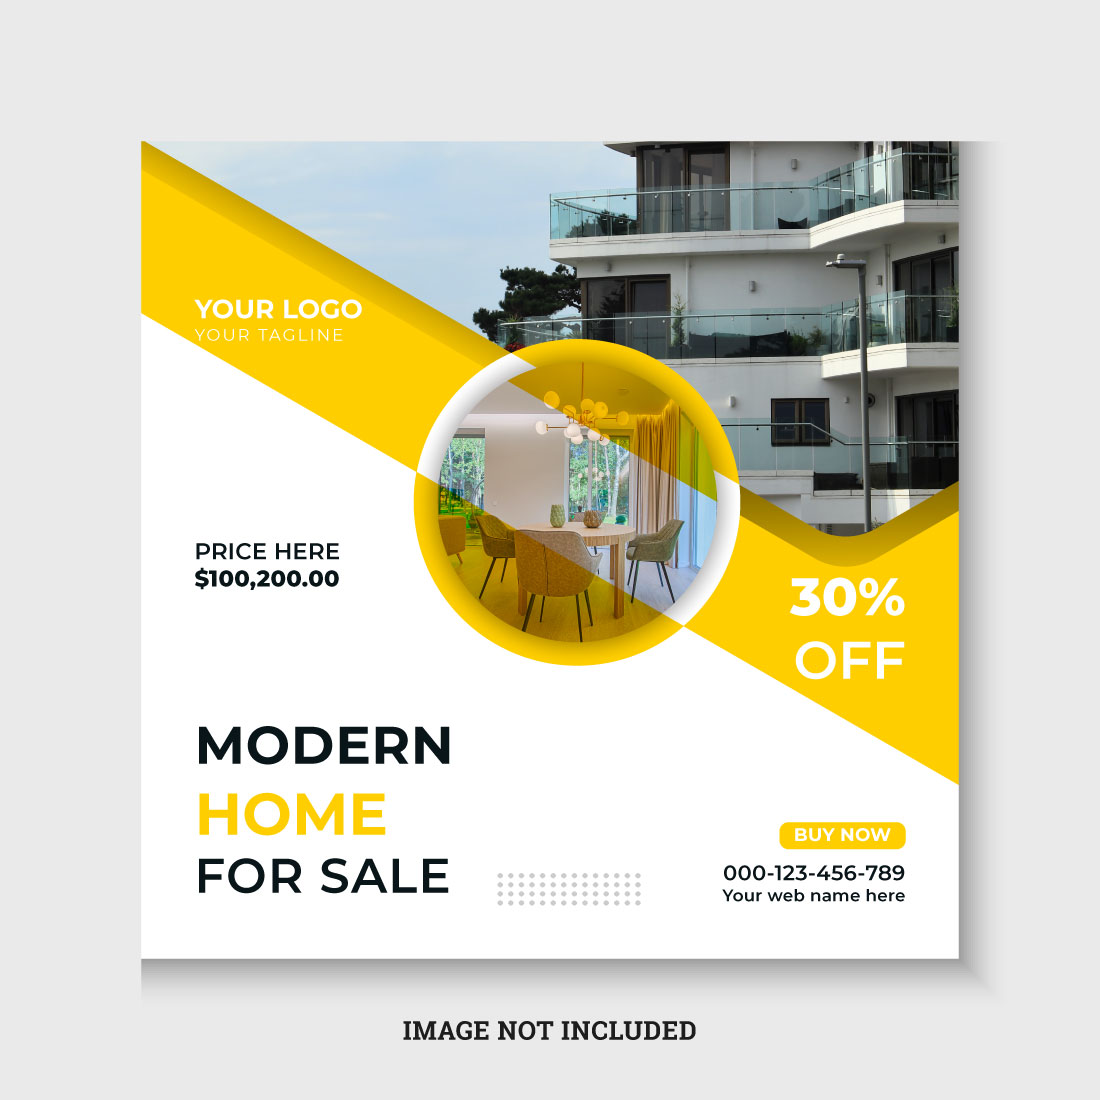 Modern and creative real estate agency social media post cover image.